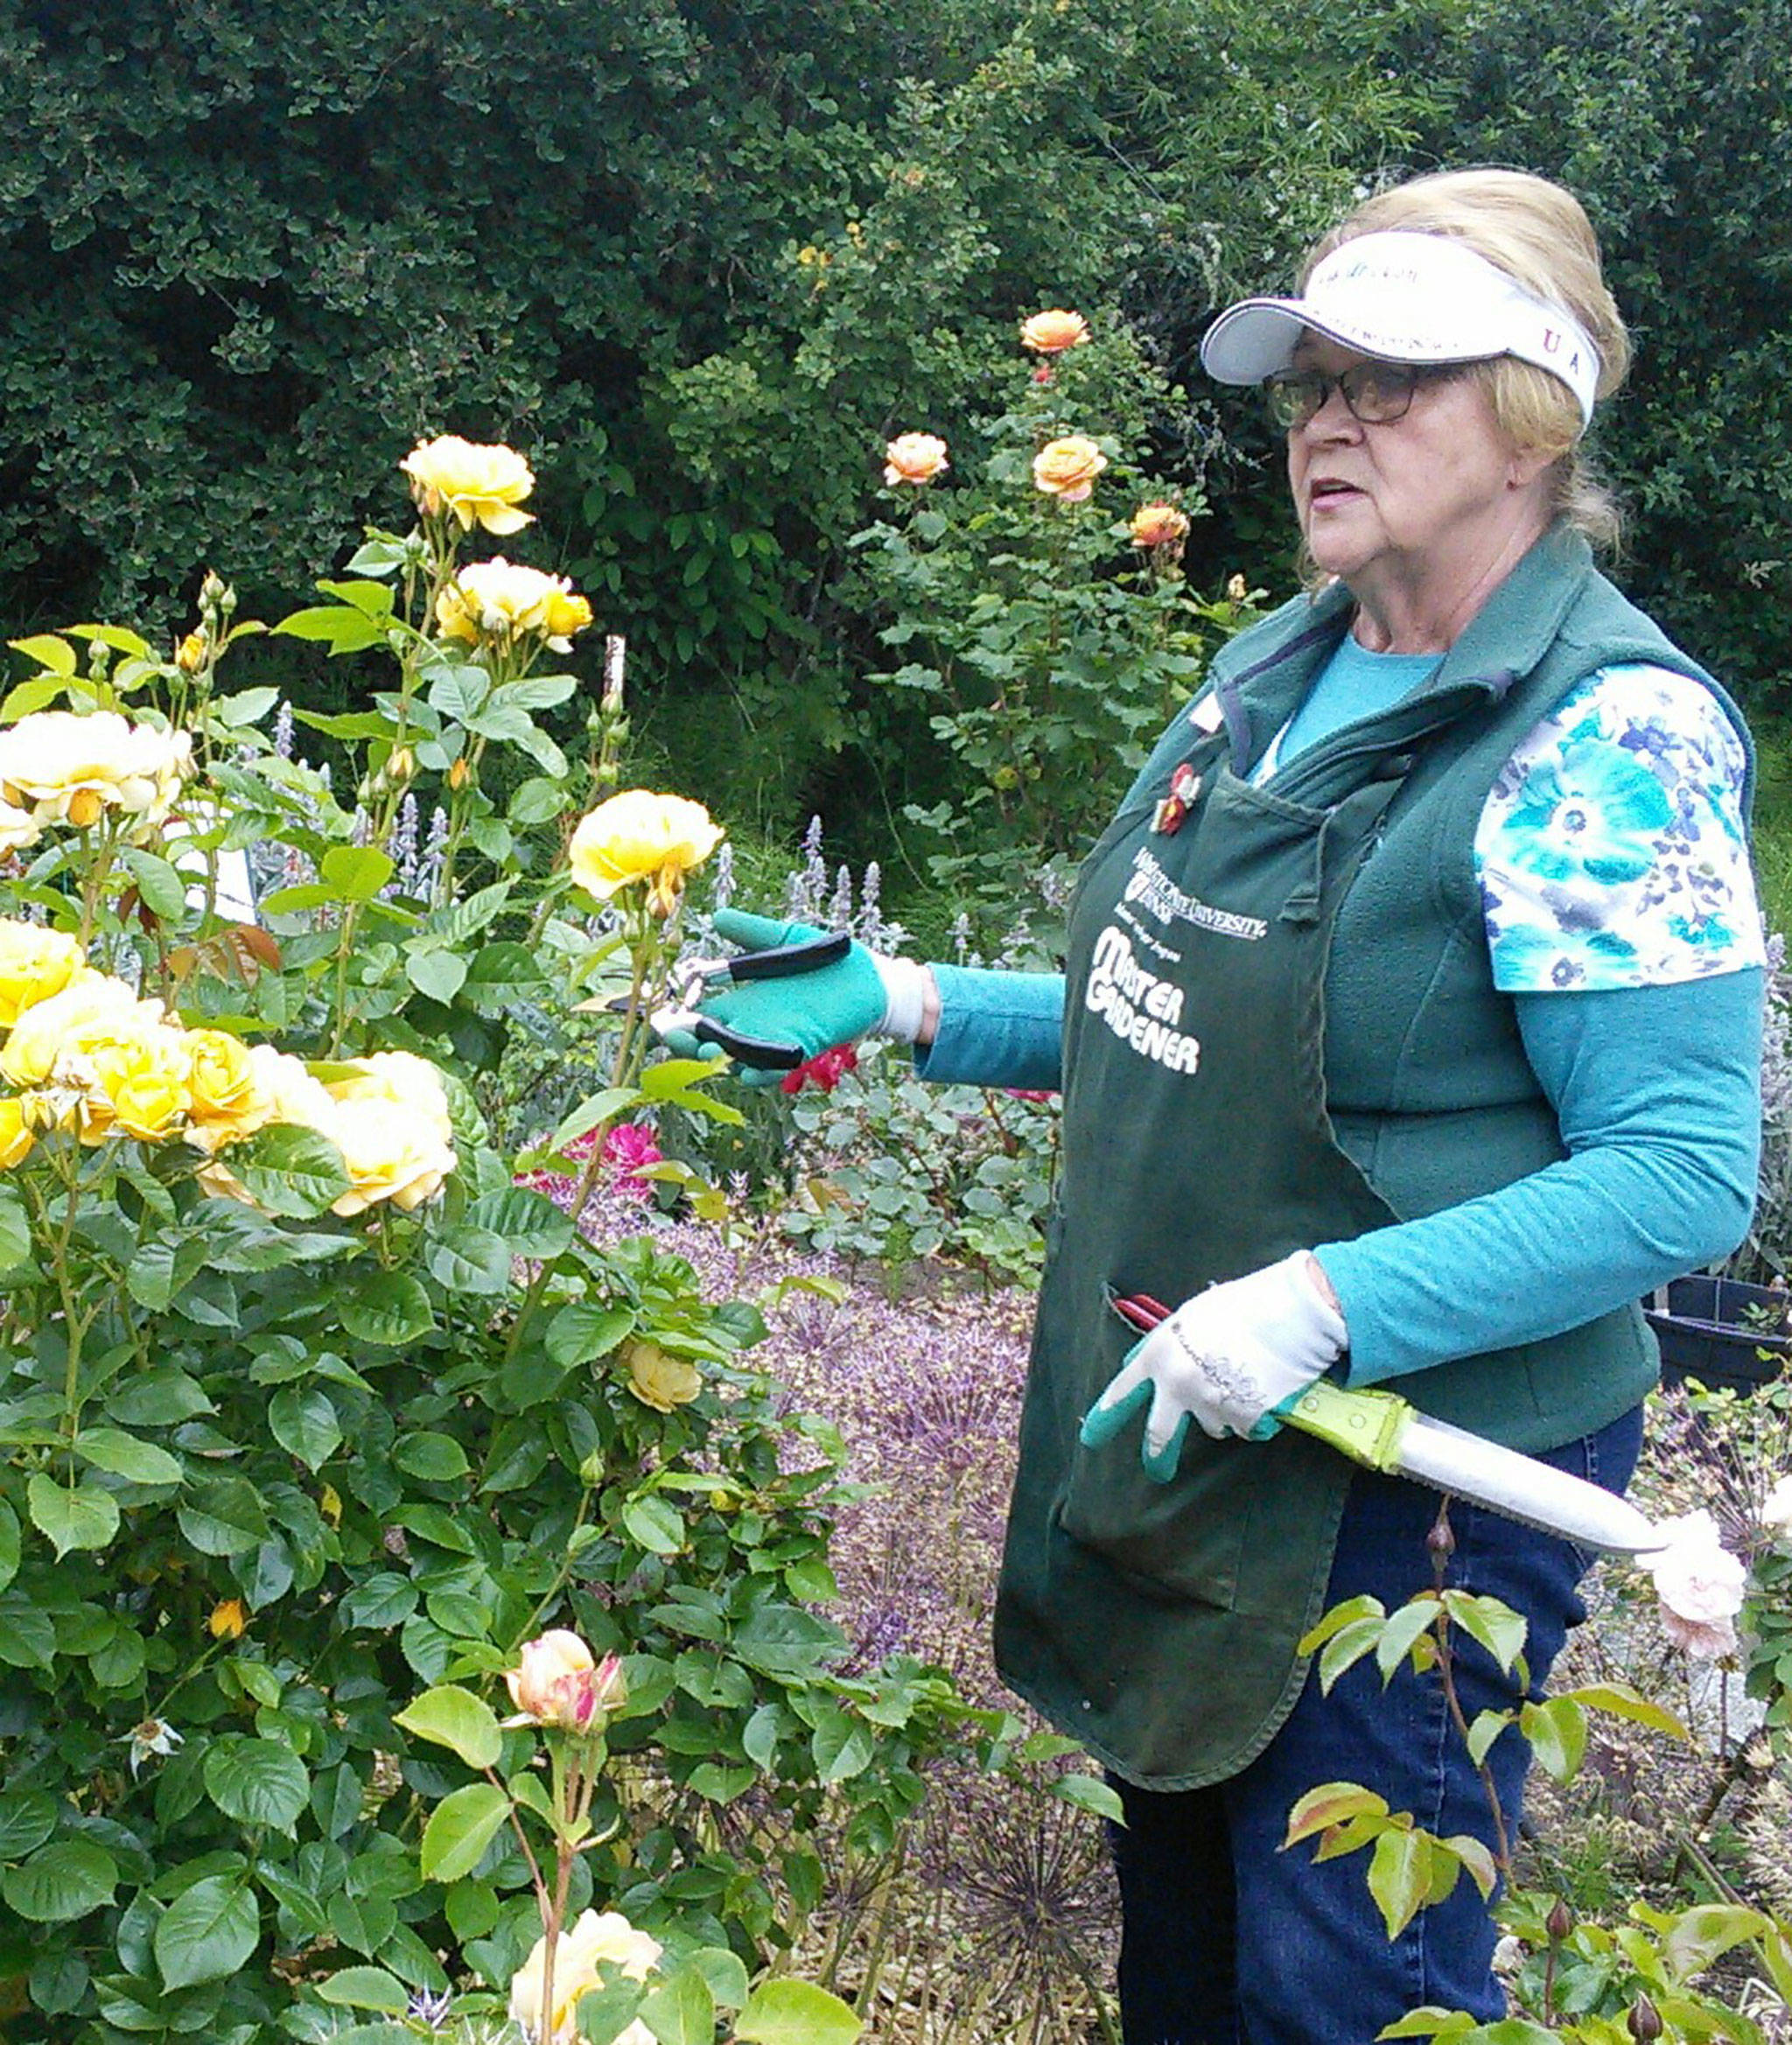 Master Gardener Sally Shunn demonstrates pruning and offers tips on caring for roses during a recent guided garden walk at the Woodcock Demonstration Garden